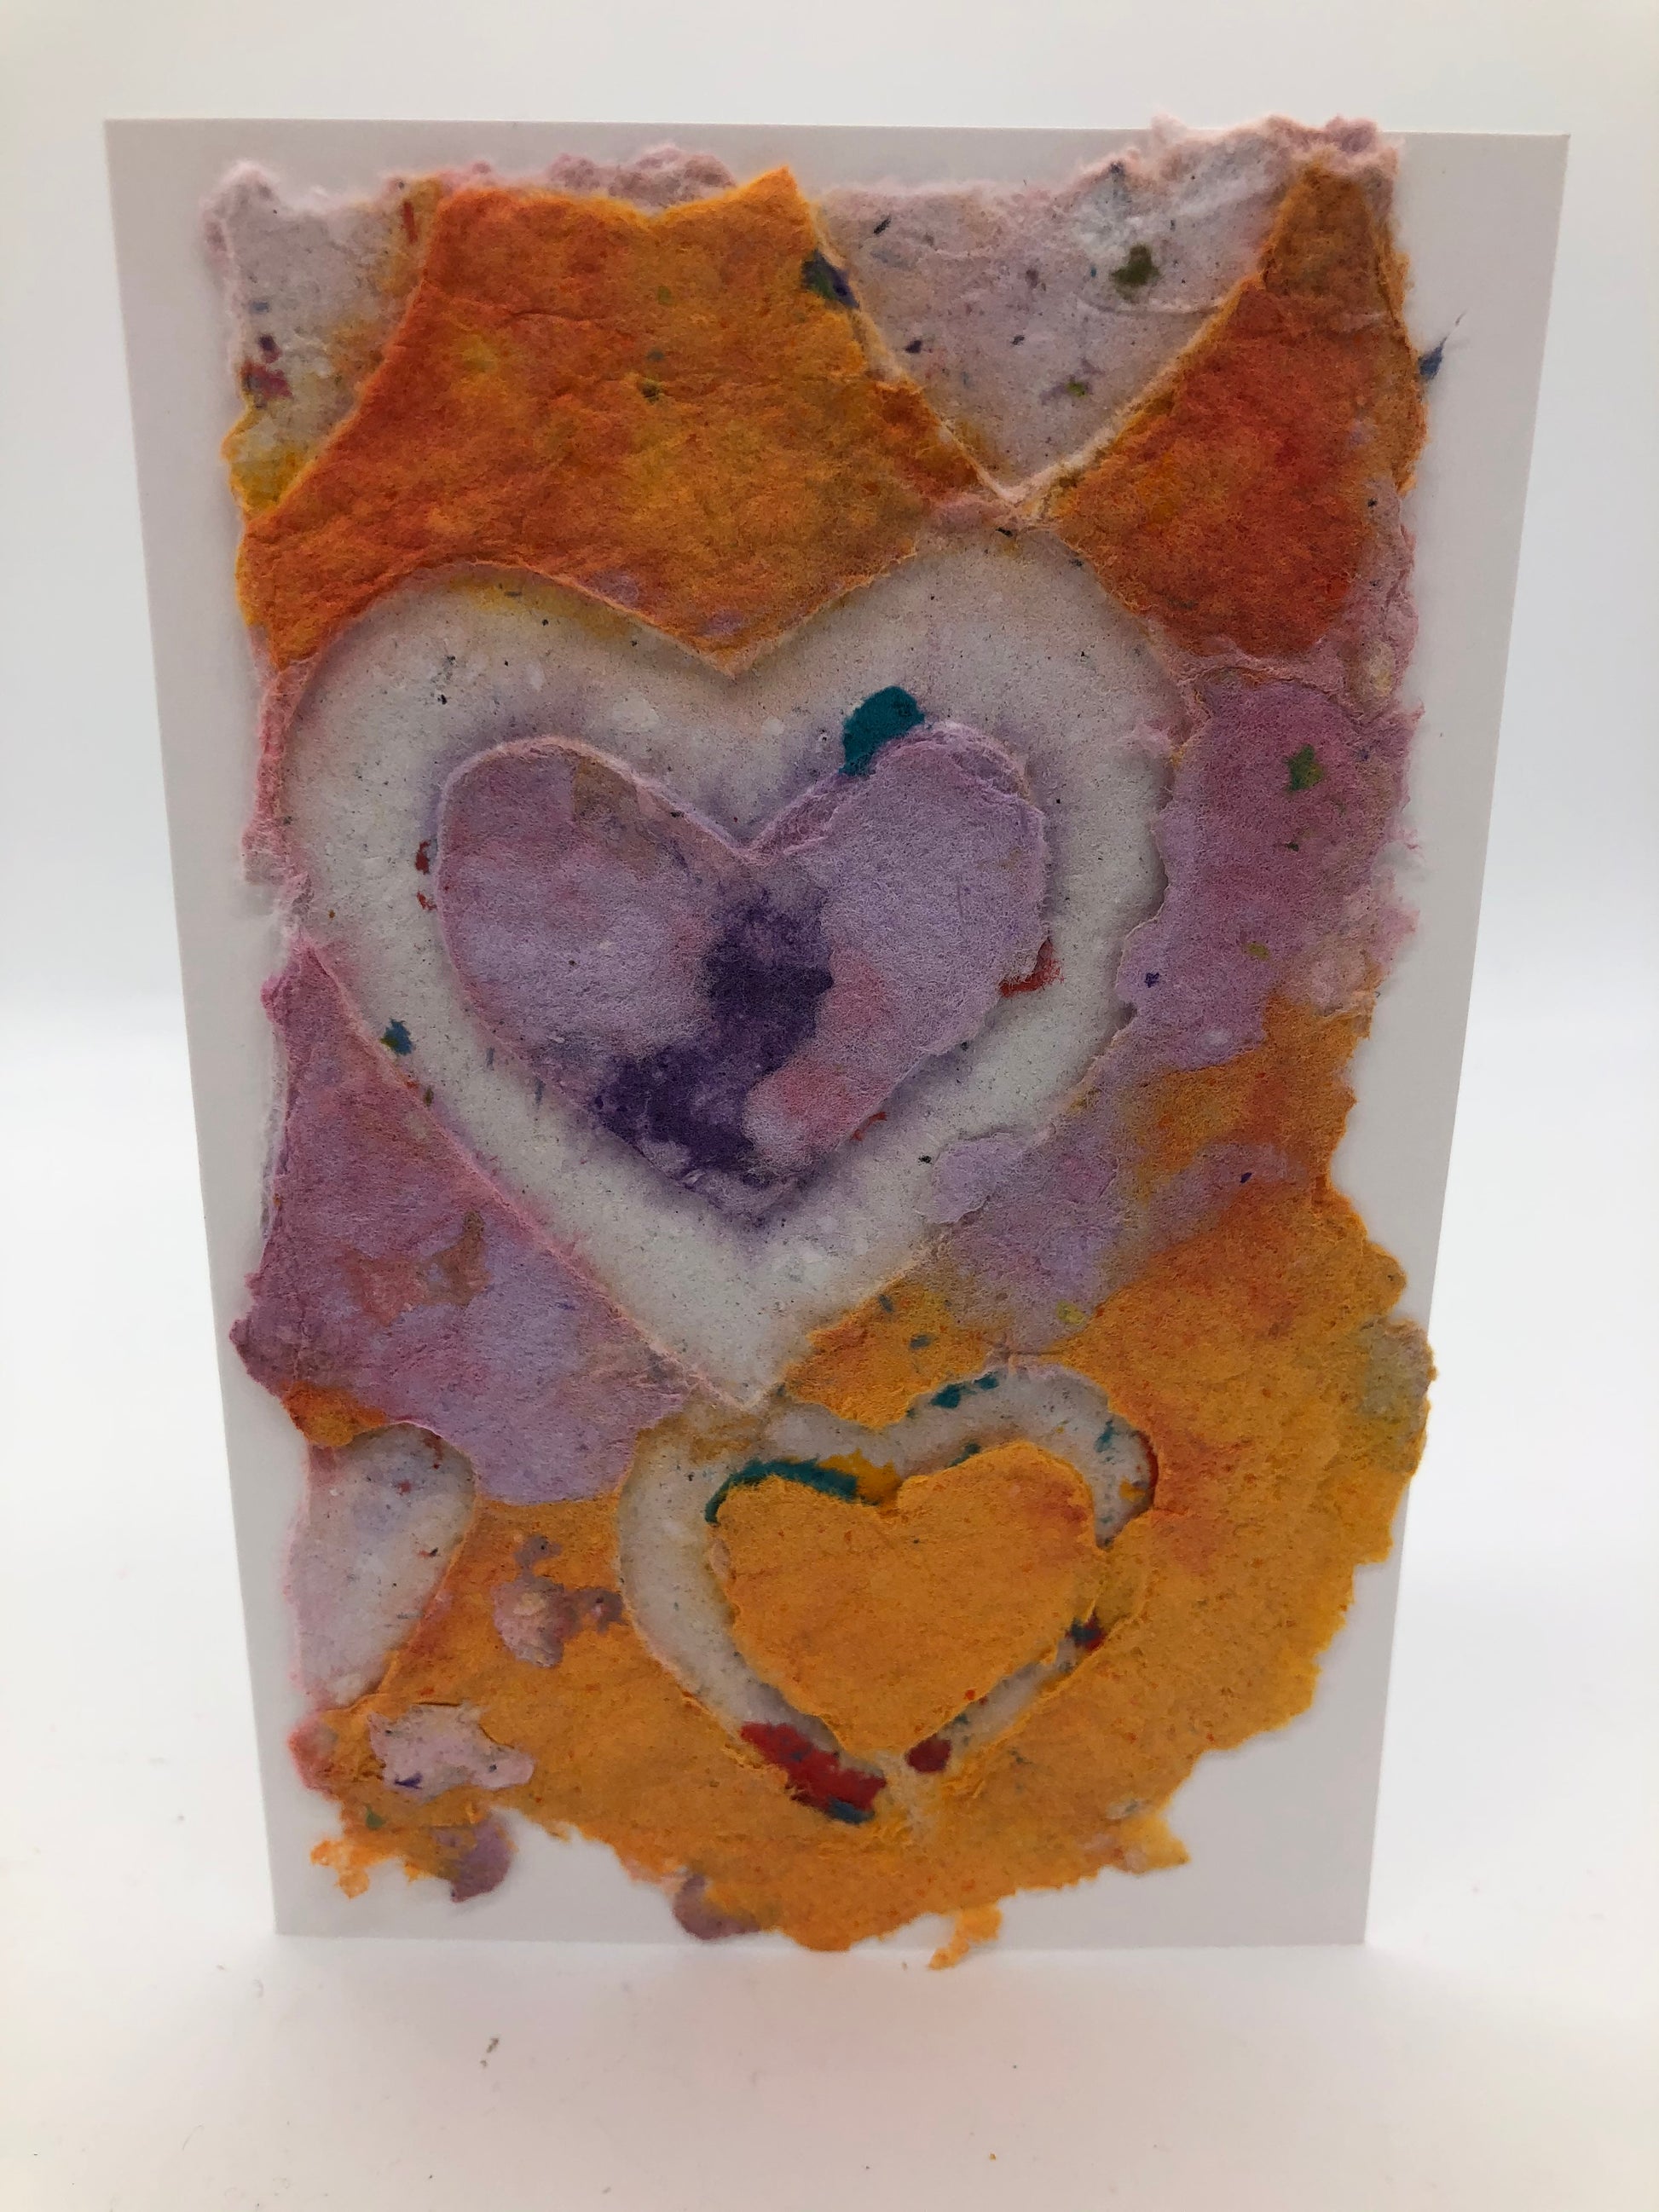 Handmade paper greeting card with purple, orange and lavender colors and a white heart with lavender heart inside itand yellow heart